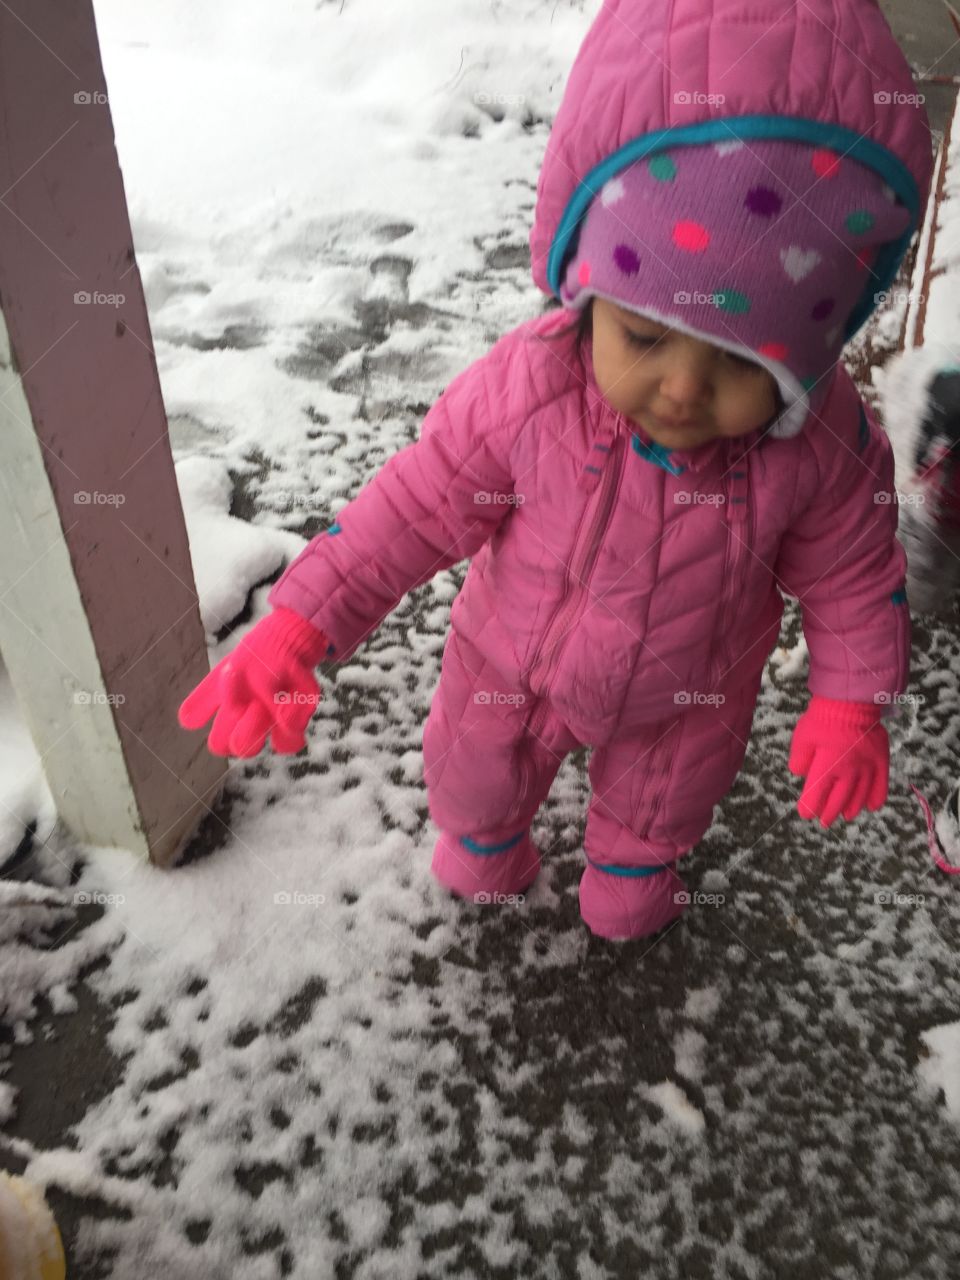 Baby playing in the snow